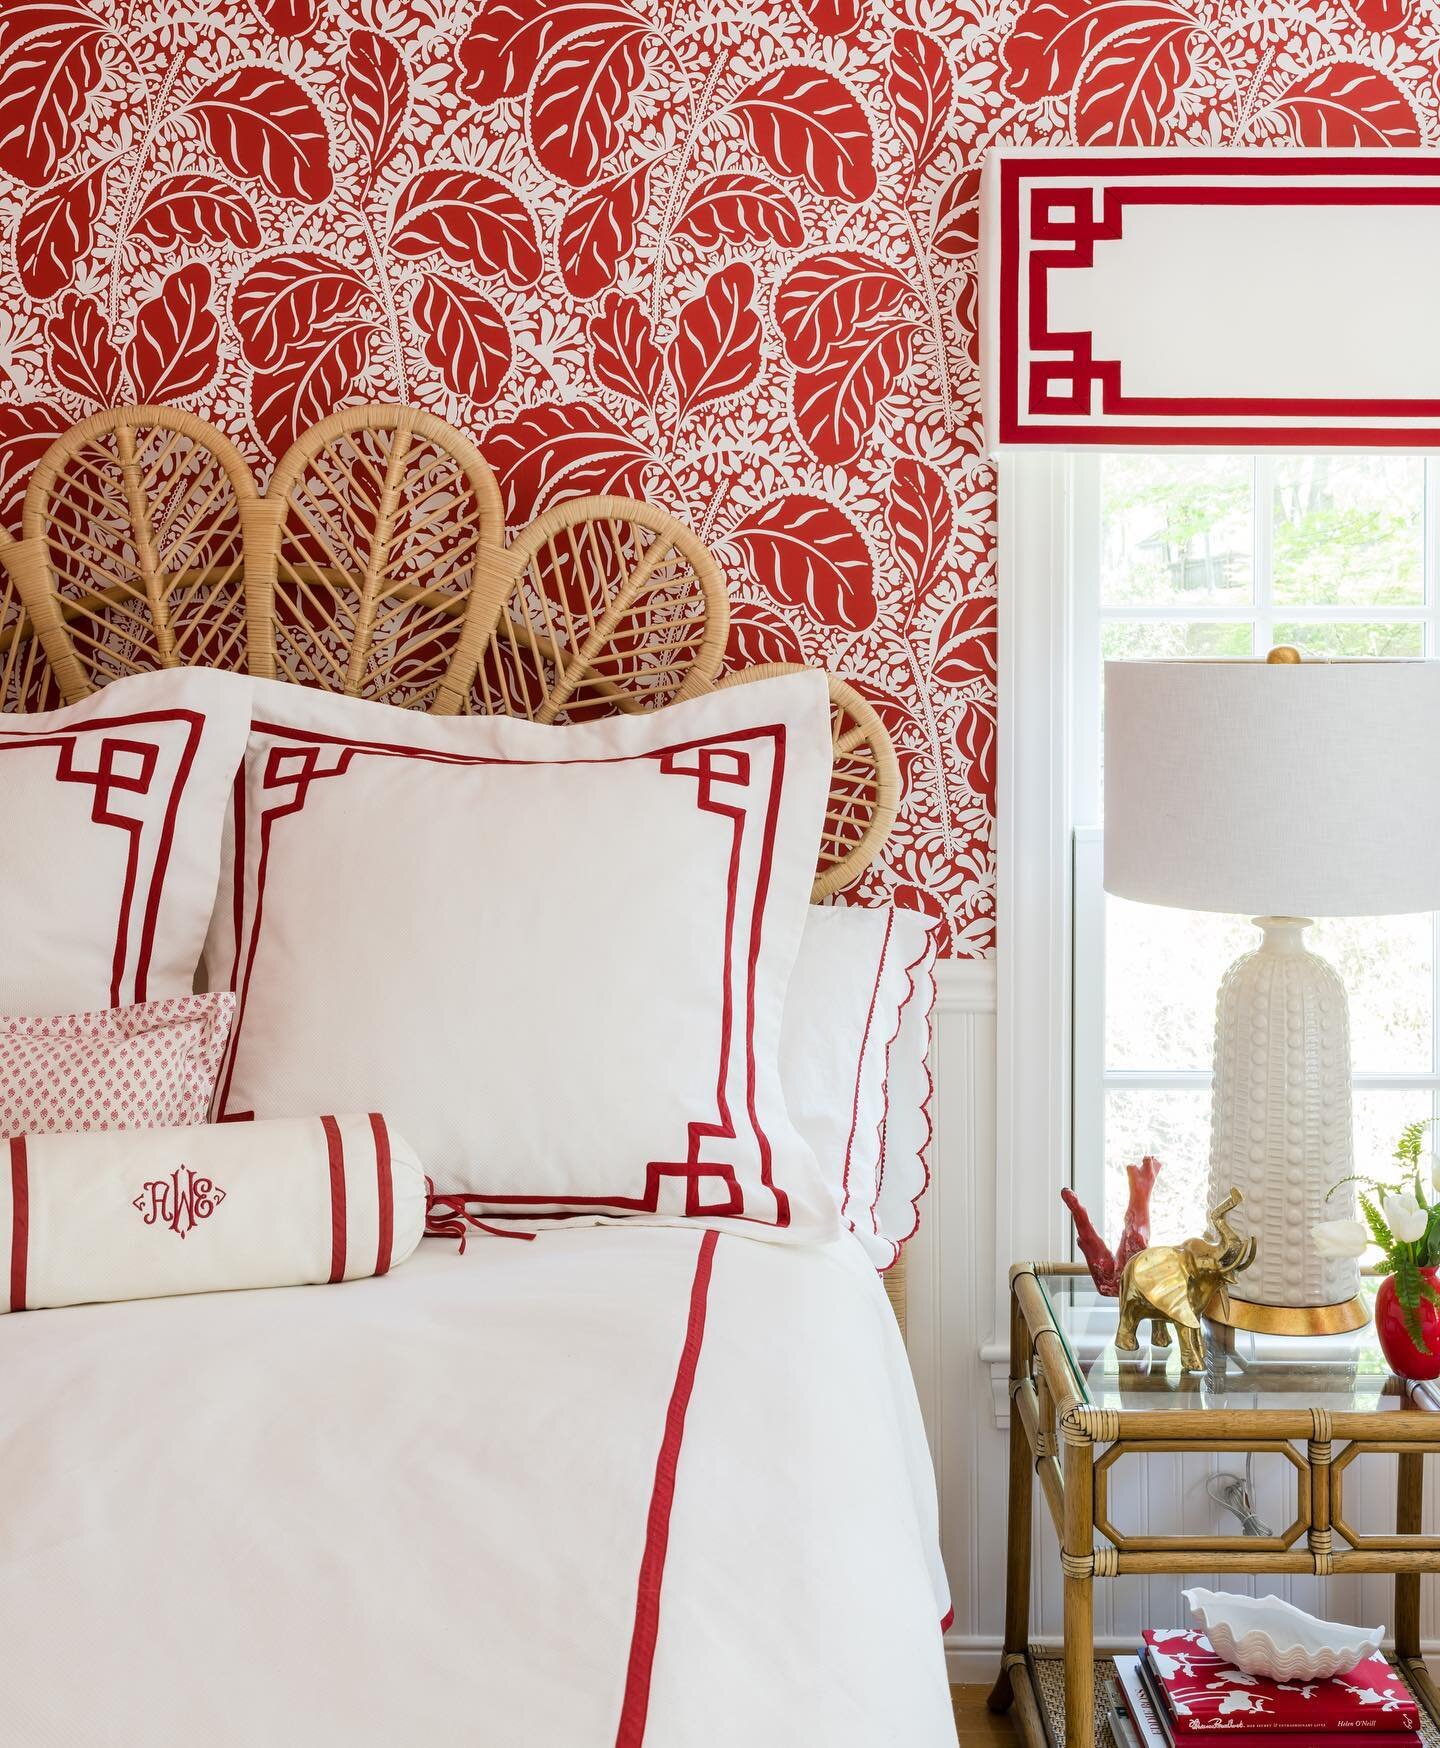 ❤️The power of RED!❤️ This pretty @janewilnerdesigns bedding pairs beautifully with the @lamaisonpierrefrey wallpaper (appropriately named Bananas 🍌🍌).❤️❤️ Design: @trellishomedesign 📸: @jessicadelaneyphotography #trellishomedesign #interiordesign